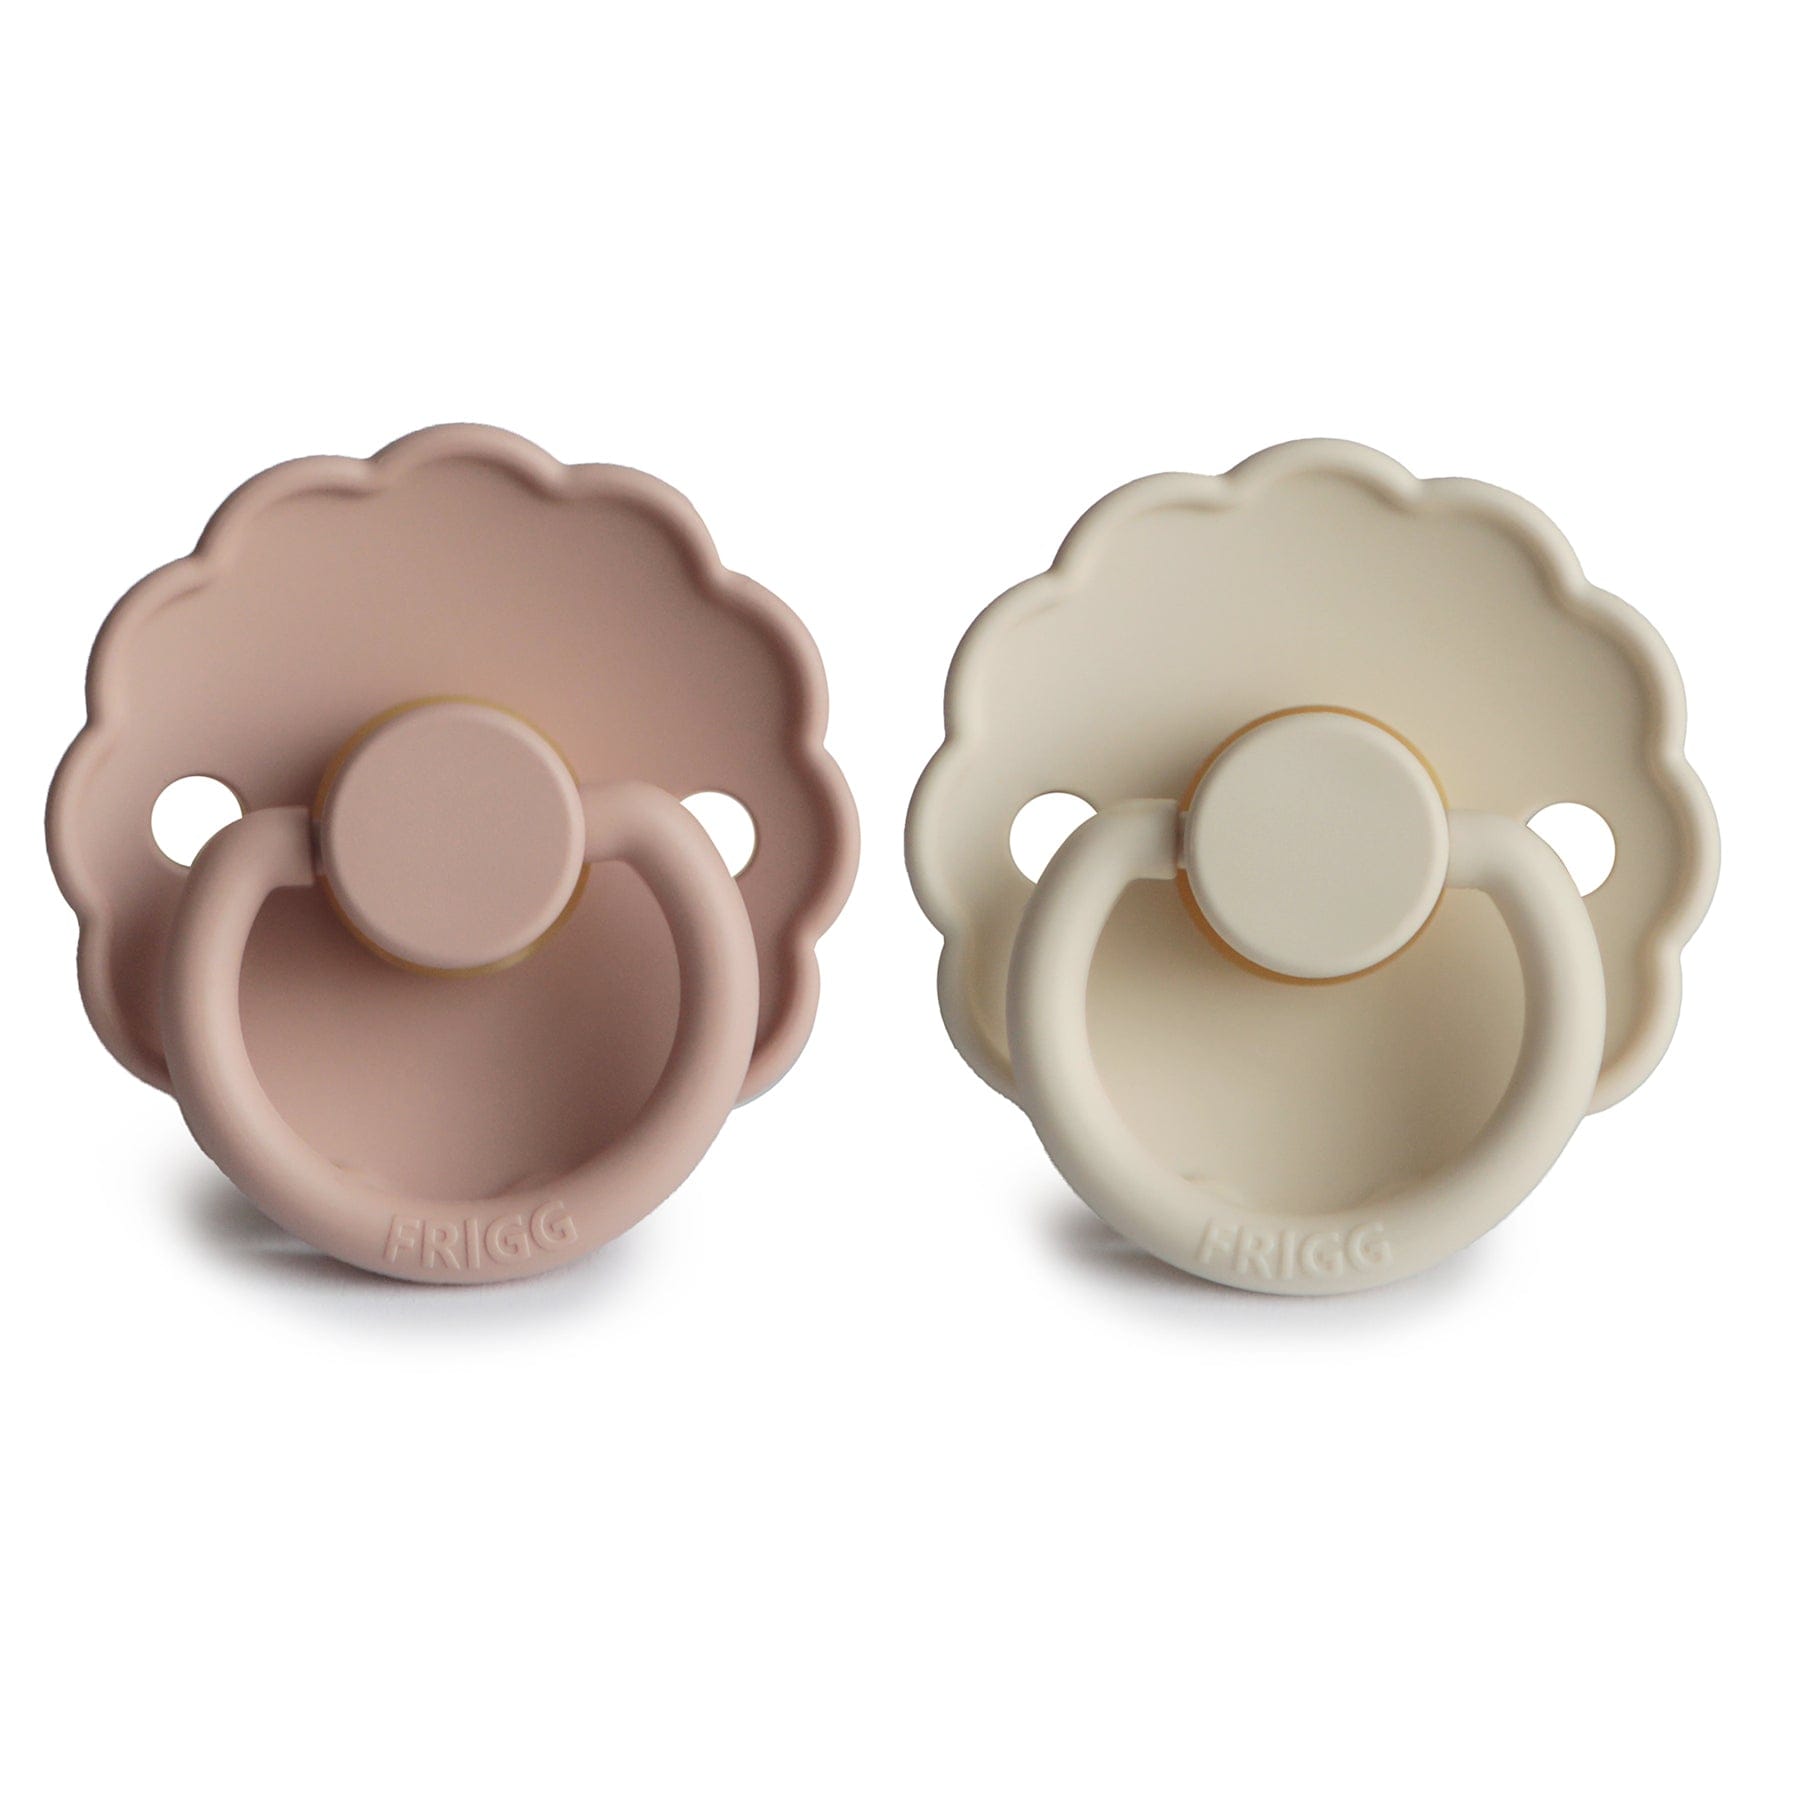 Mushie Soother FRIGG Daisy Natural Rubber Baby Pacifier (Blush/Cream) 2-Pack